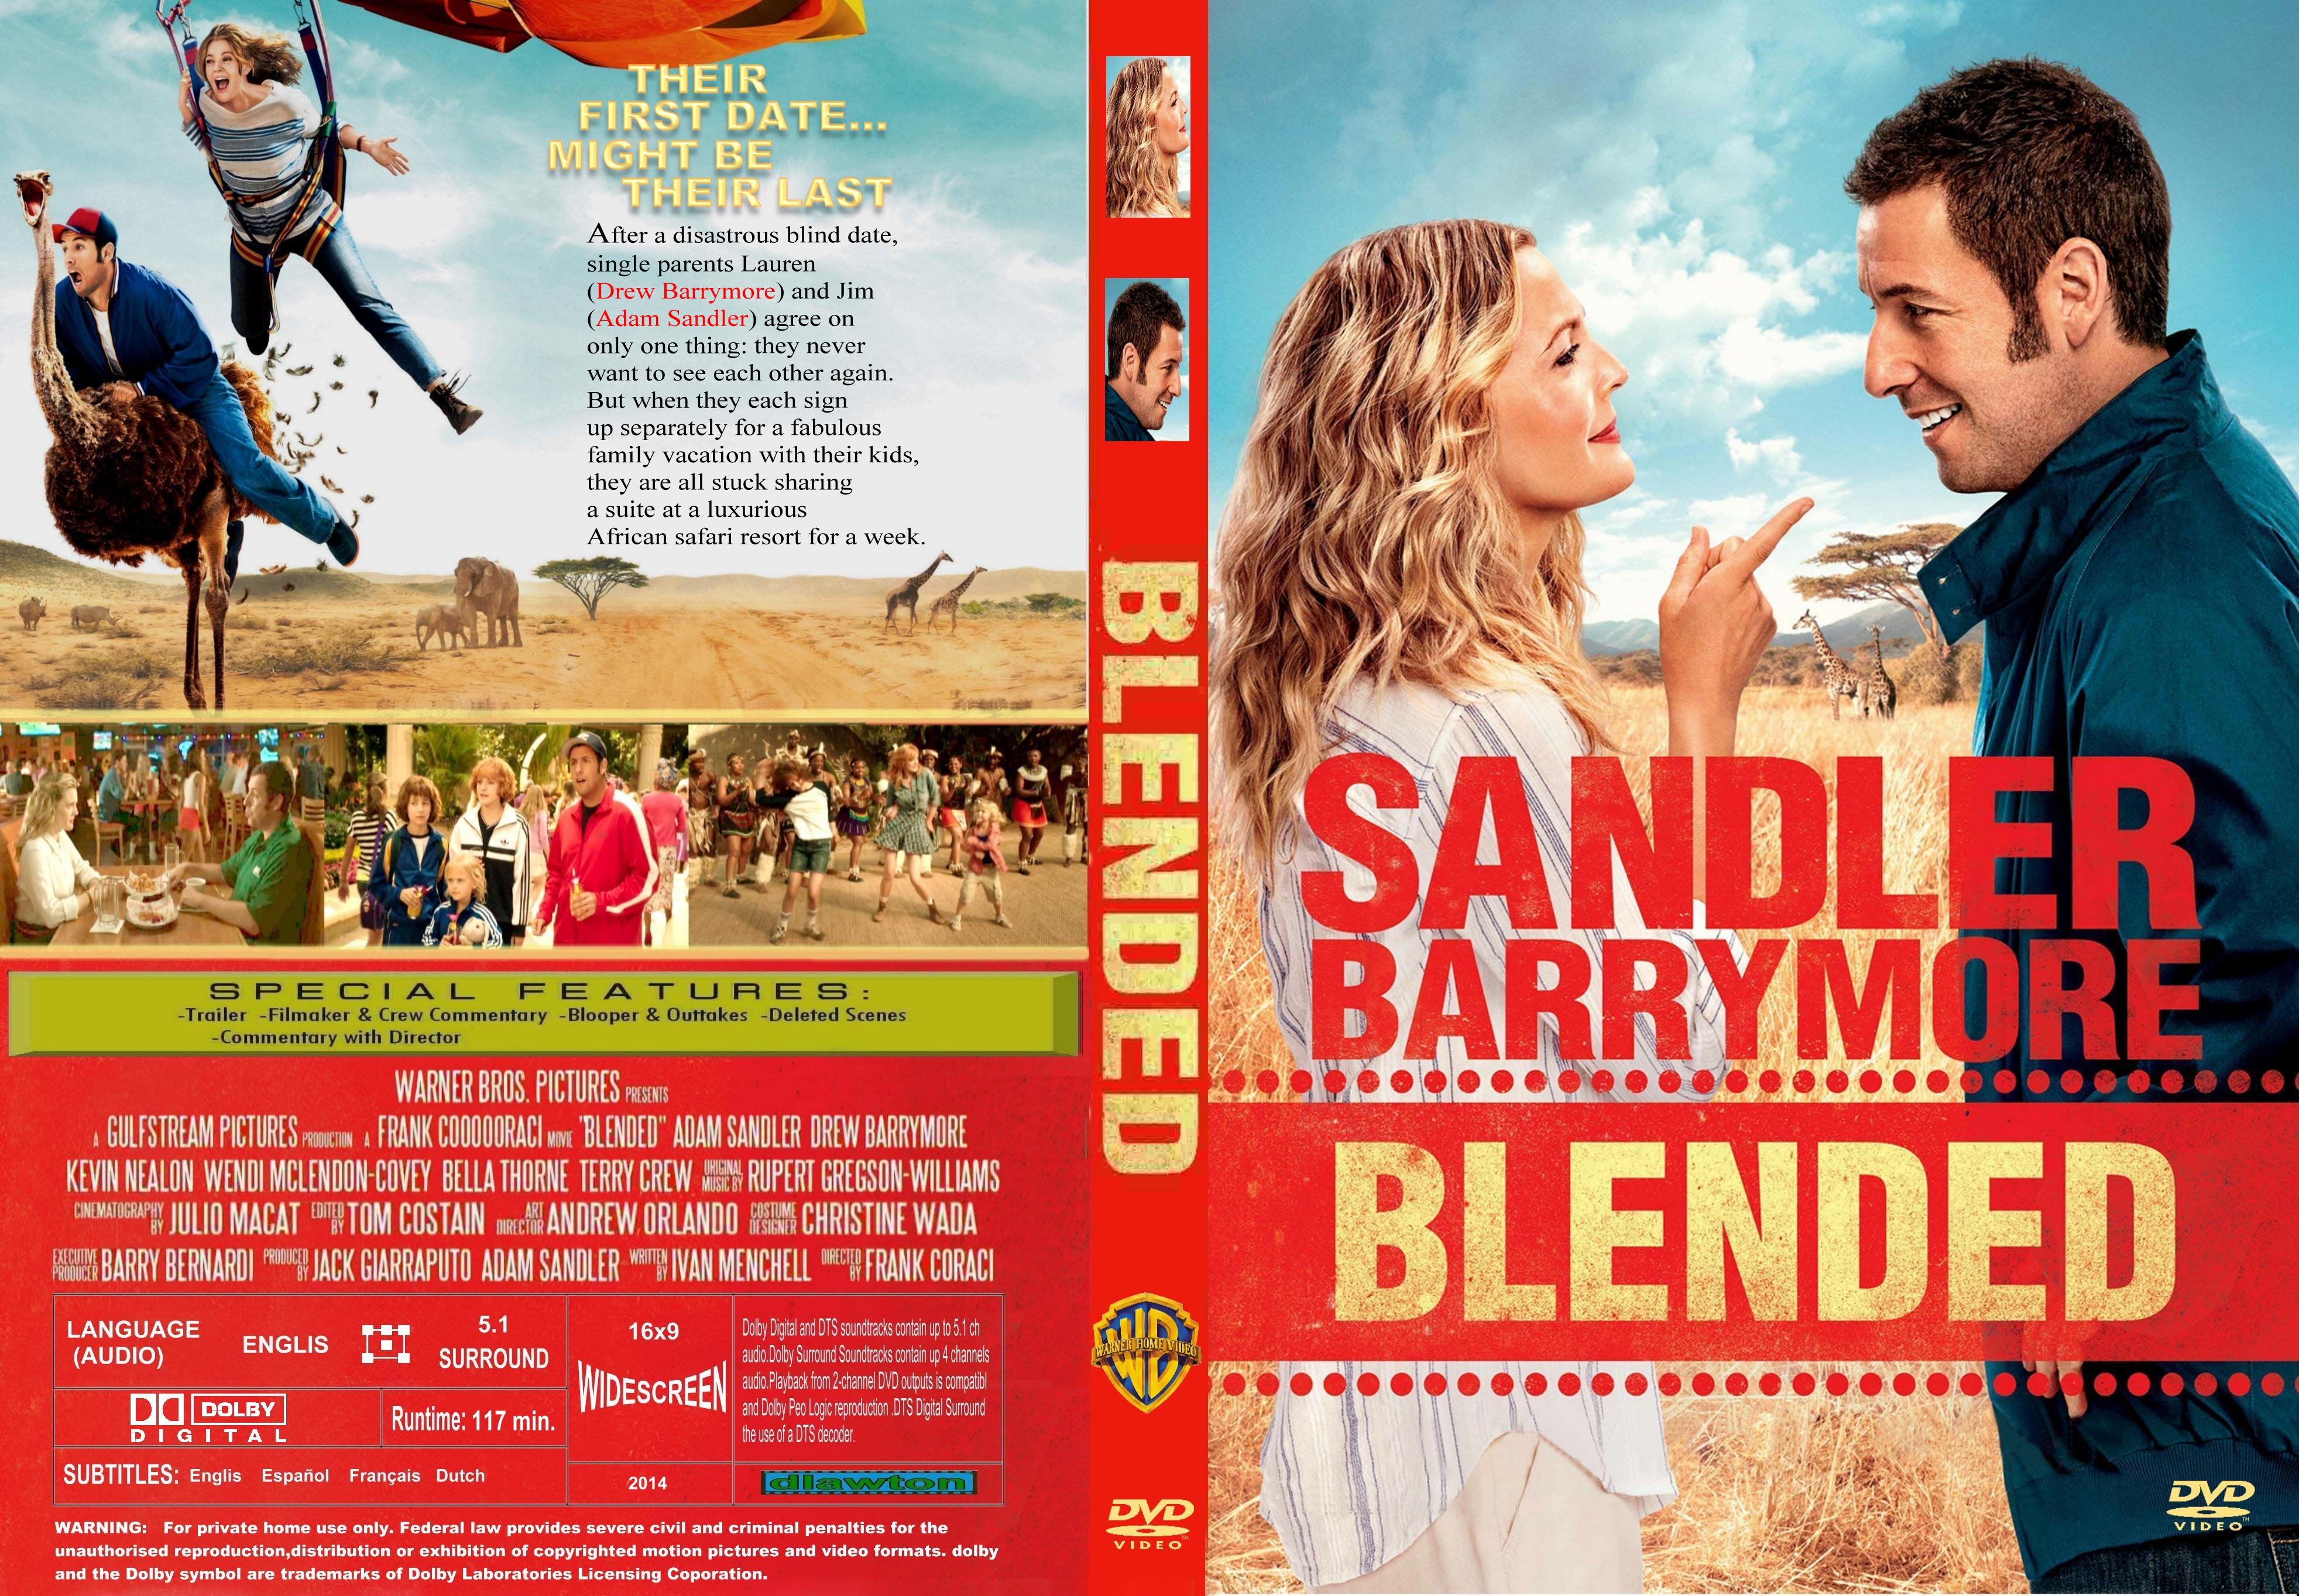 Blended Pics, Movie Collection